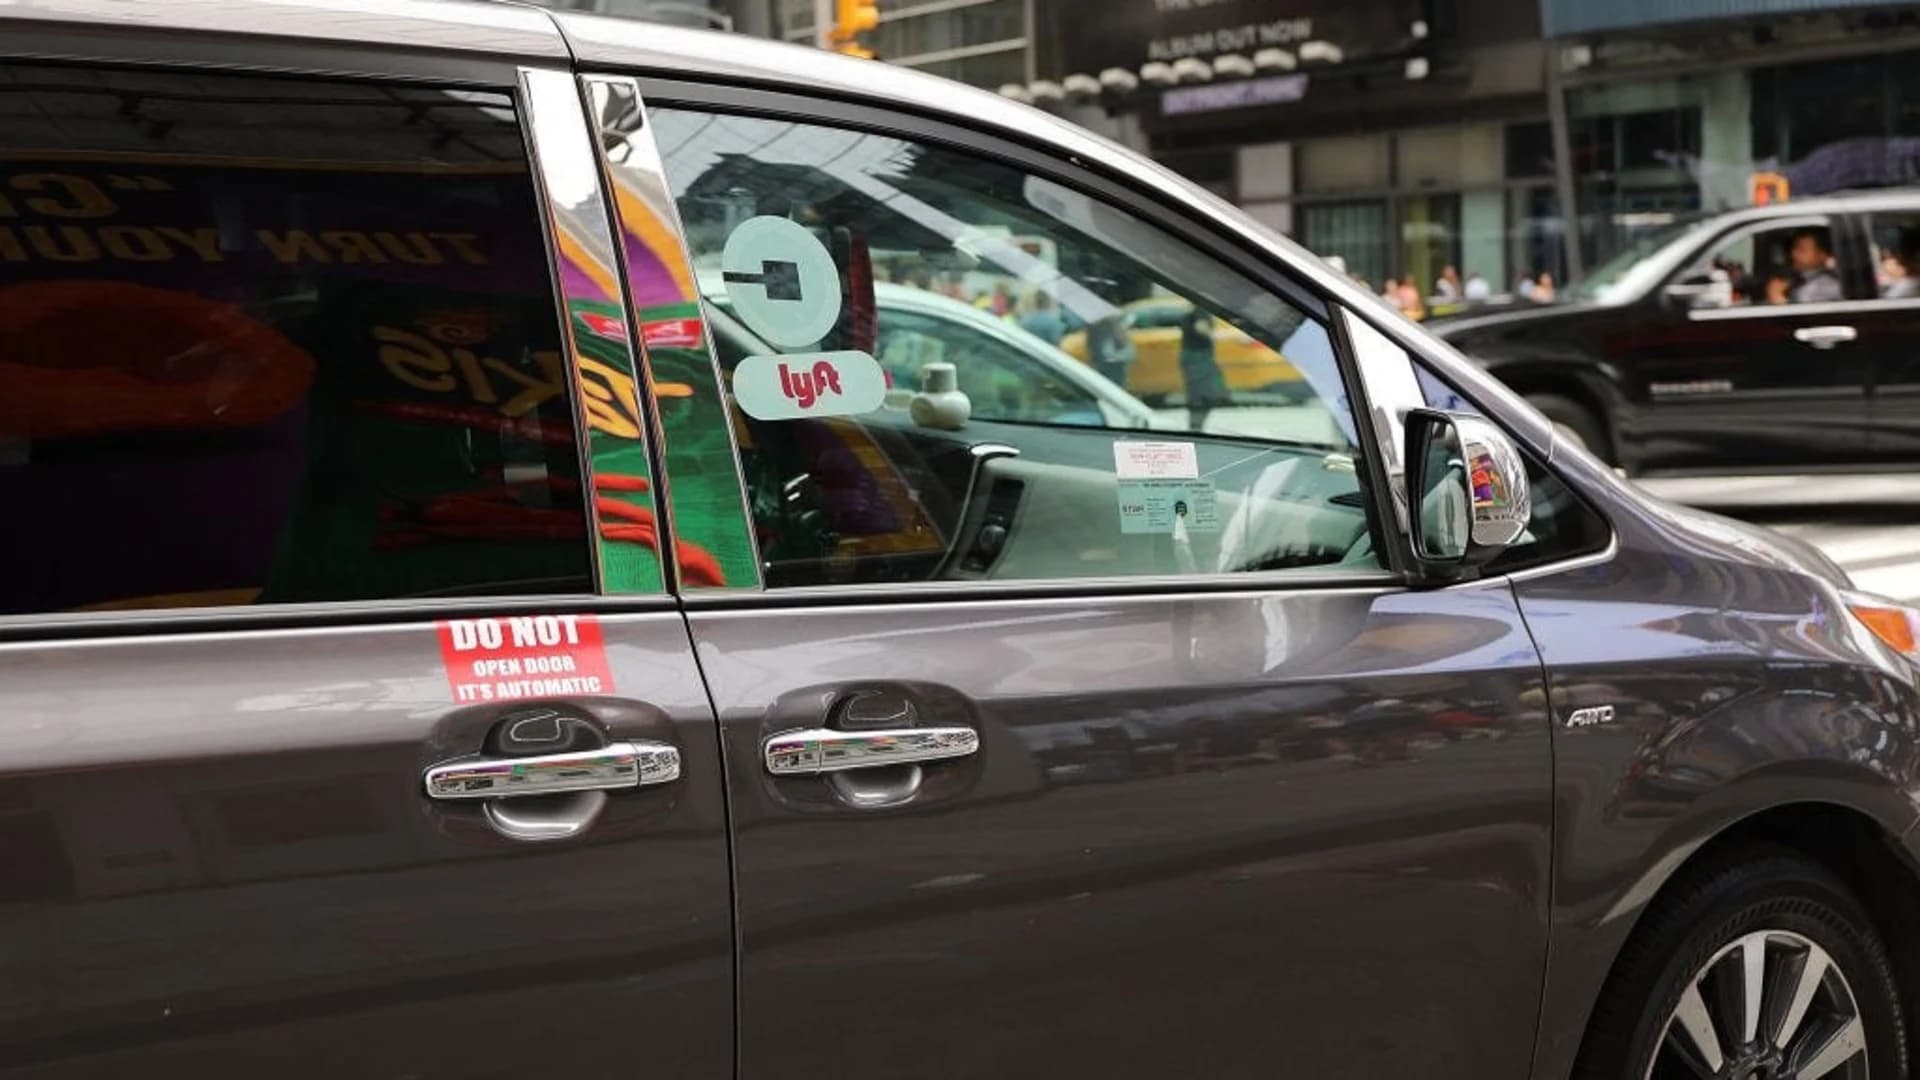 NYC moves to rein in Uber with cap on ride-hail vehicles